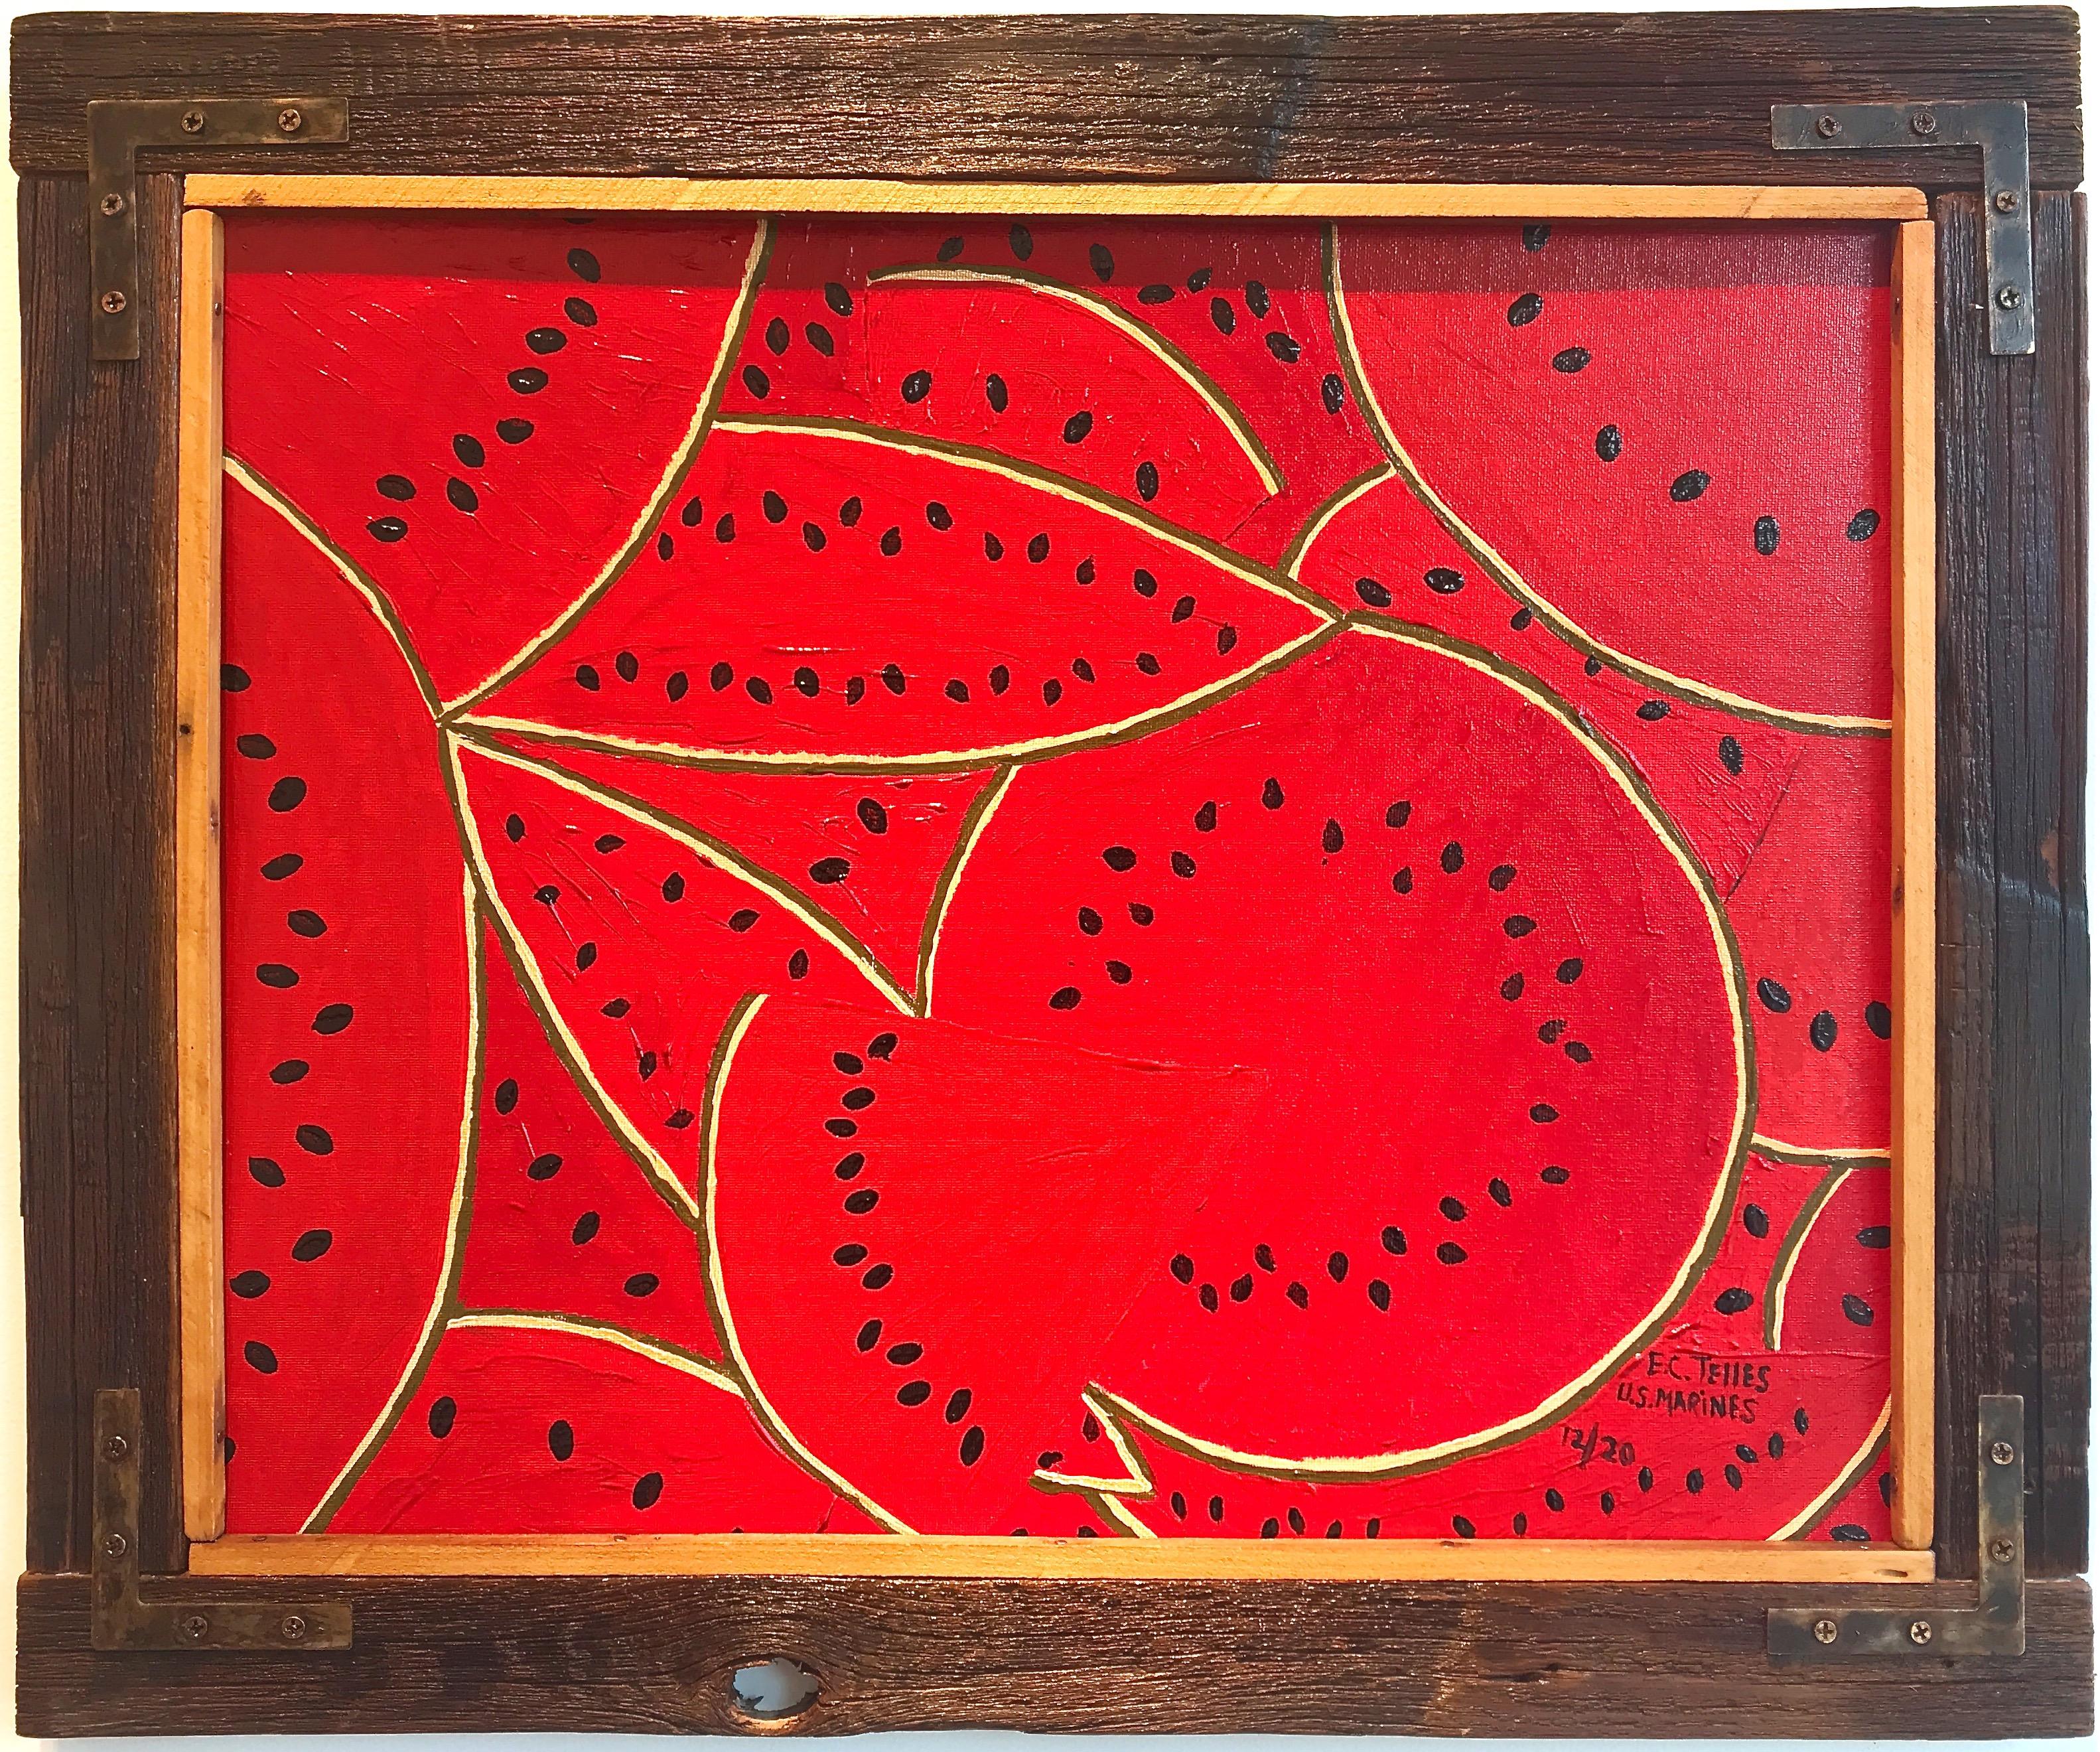 Elias Telles Abstract Painting - "Watermelons"   Folk Art Composition Red Watermelon Slices/ Seeds Artist Frame